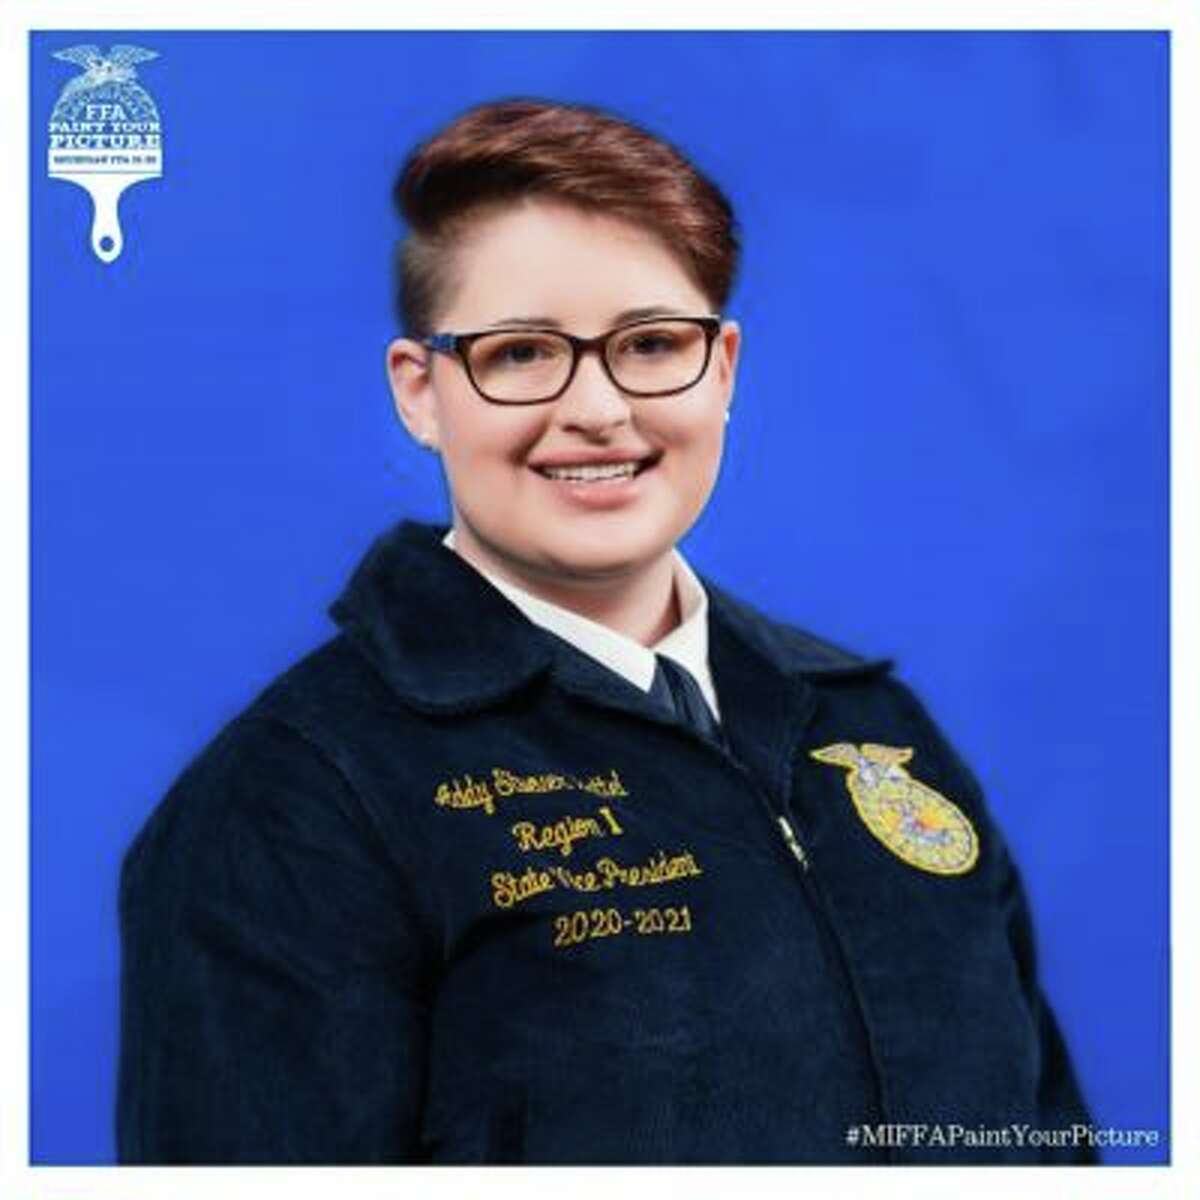 Addy Stuever Battel was recognized by the national FFA for her organization's contributions to her community.